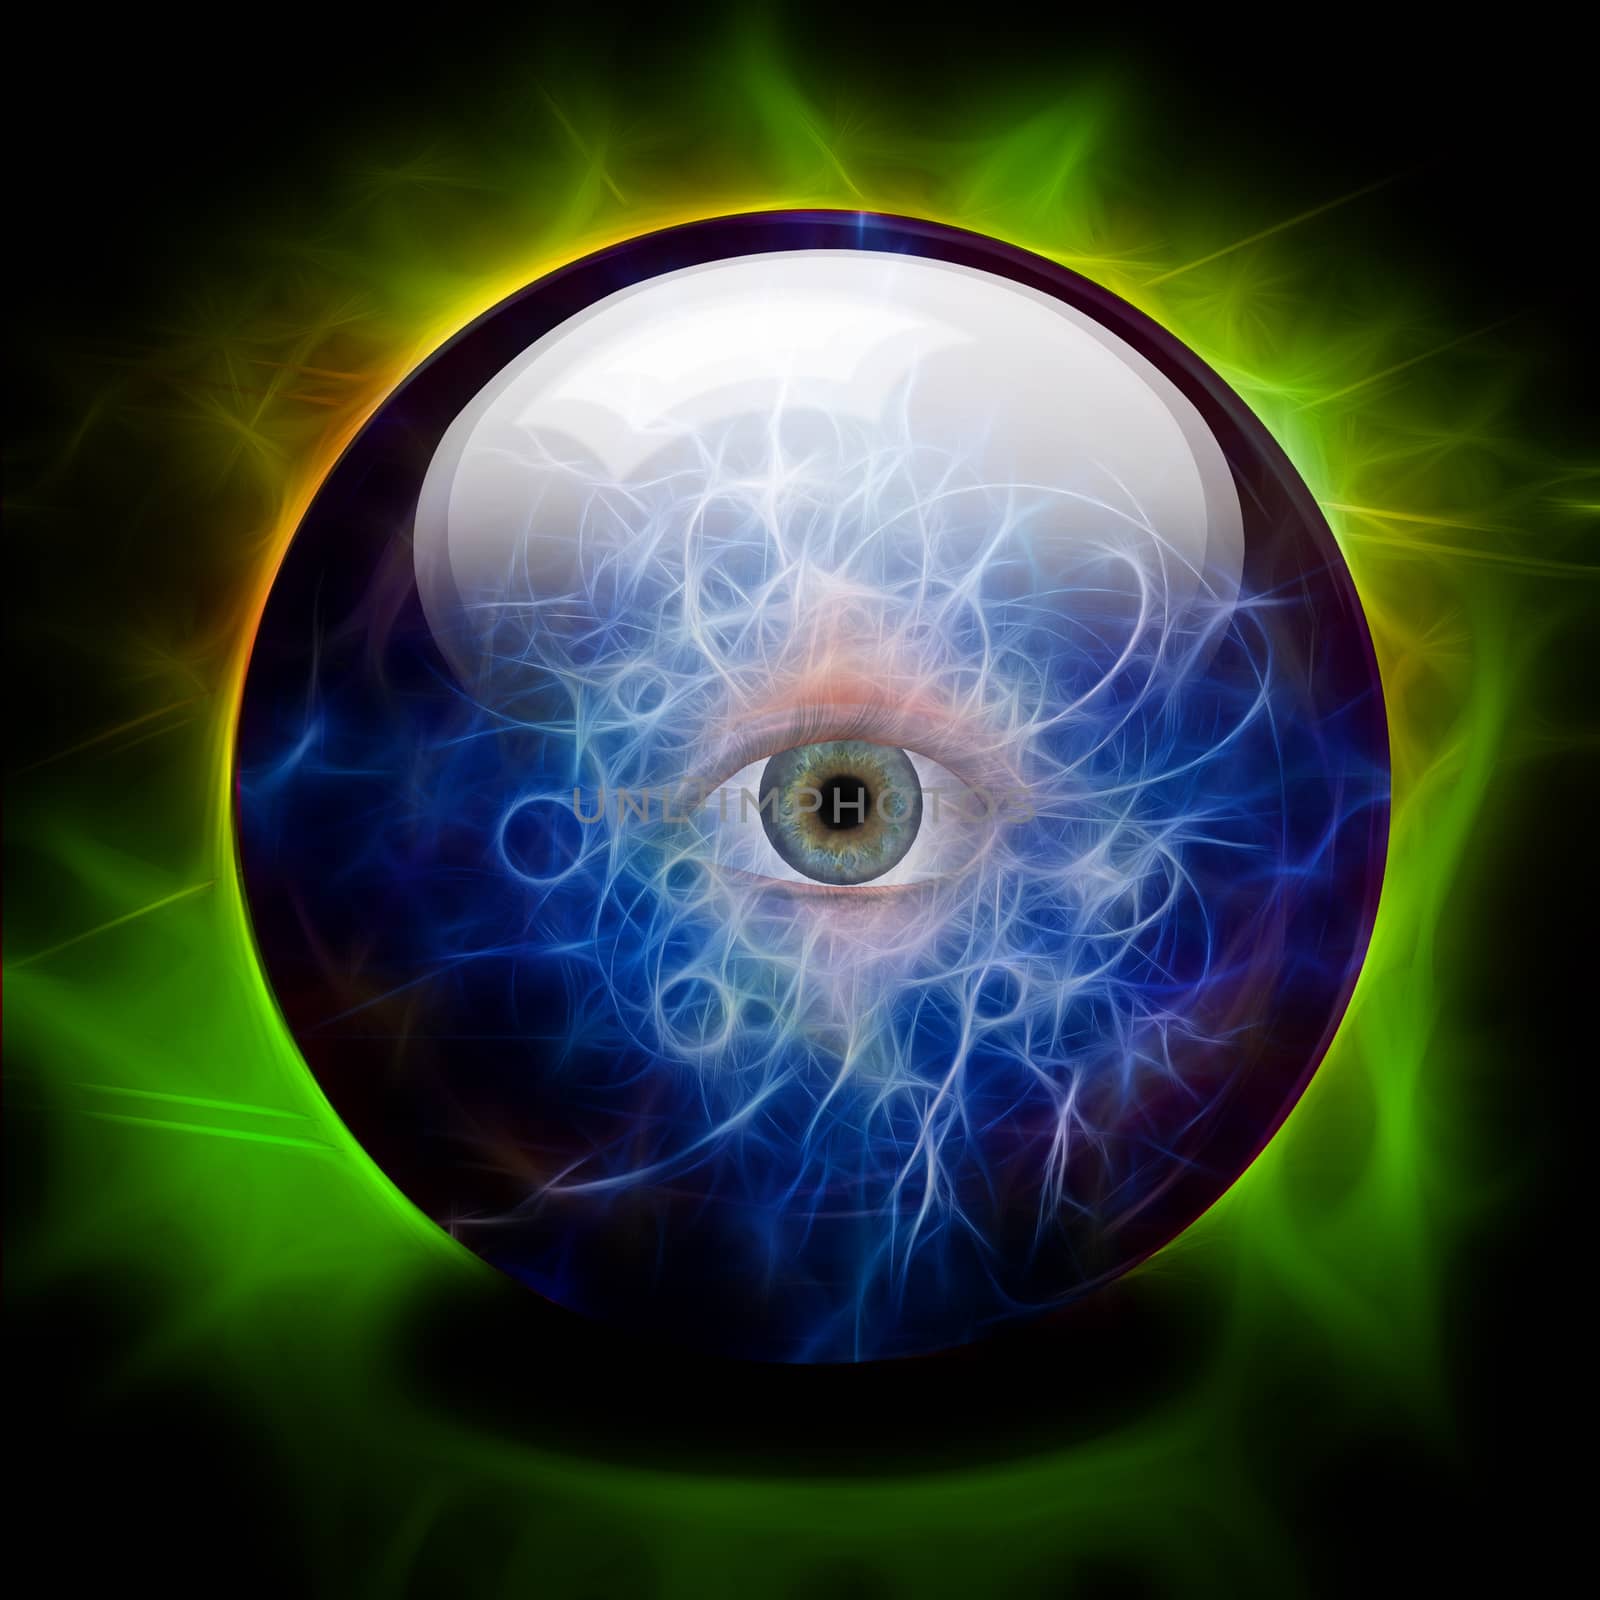 Crystal ball with all seeing eye